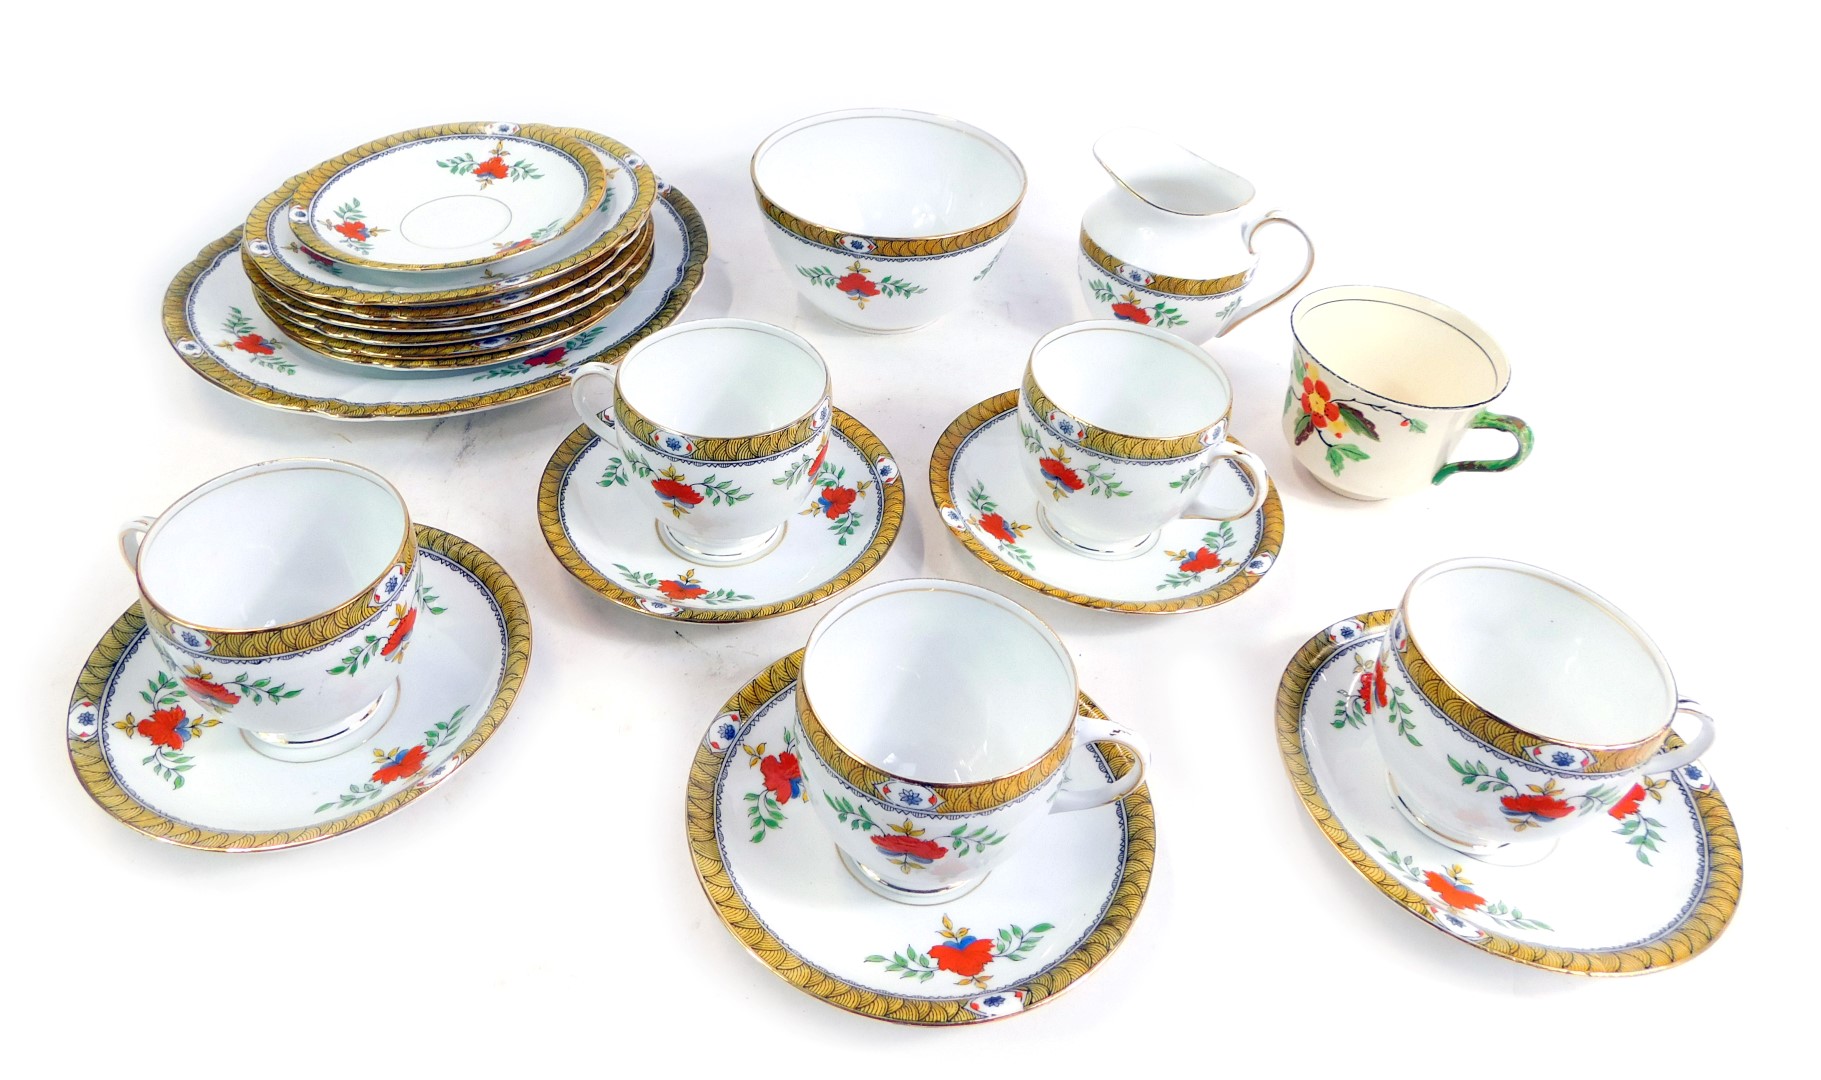 A Melba bone china part tea service, each piece decorated with flowers against a white ground, with